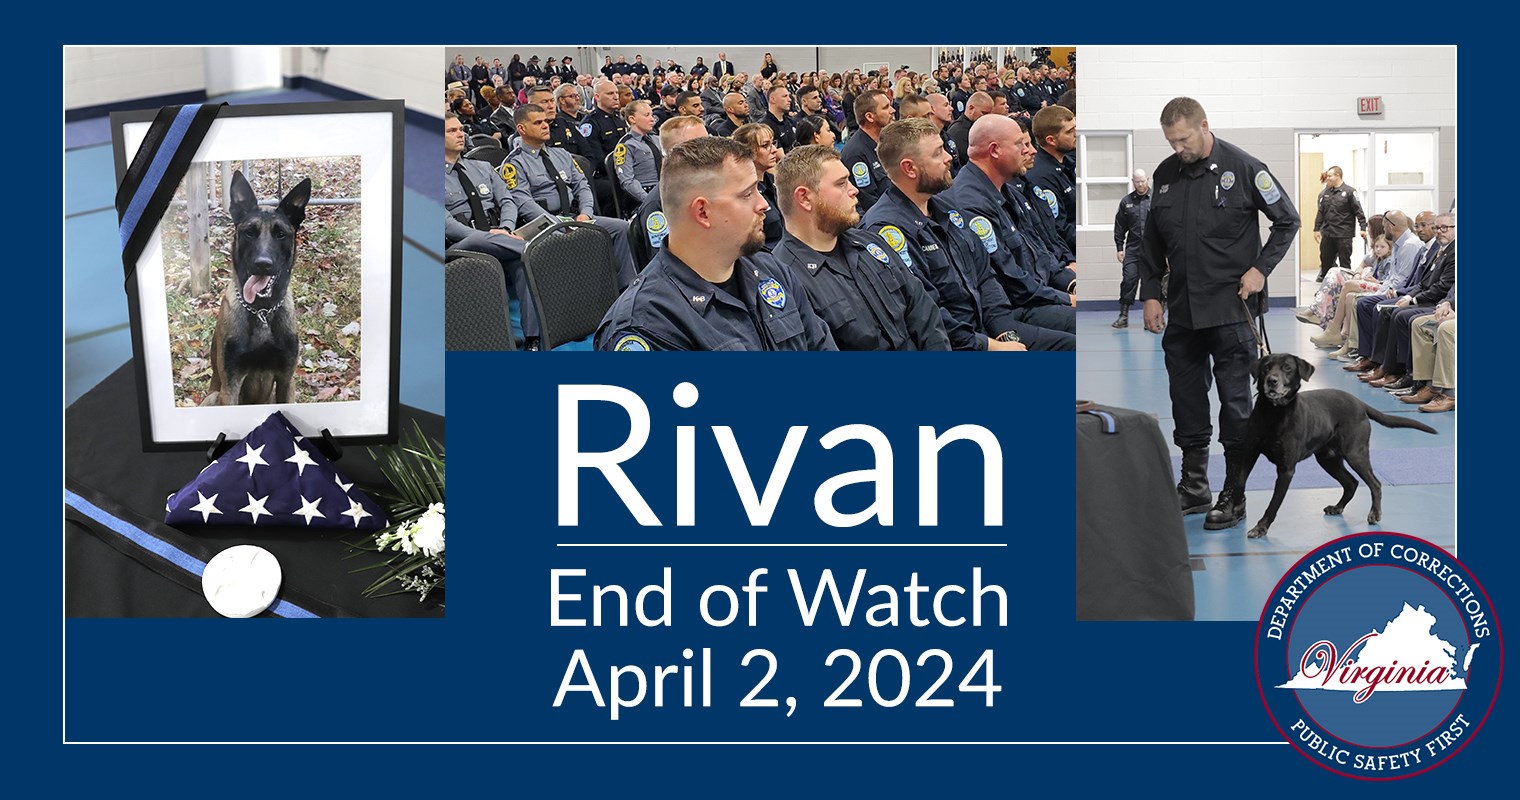 Rivan, End of Watch, April 2, 2024 text displayed with collage of memorial service.